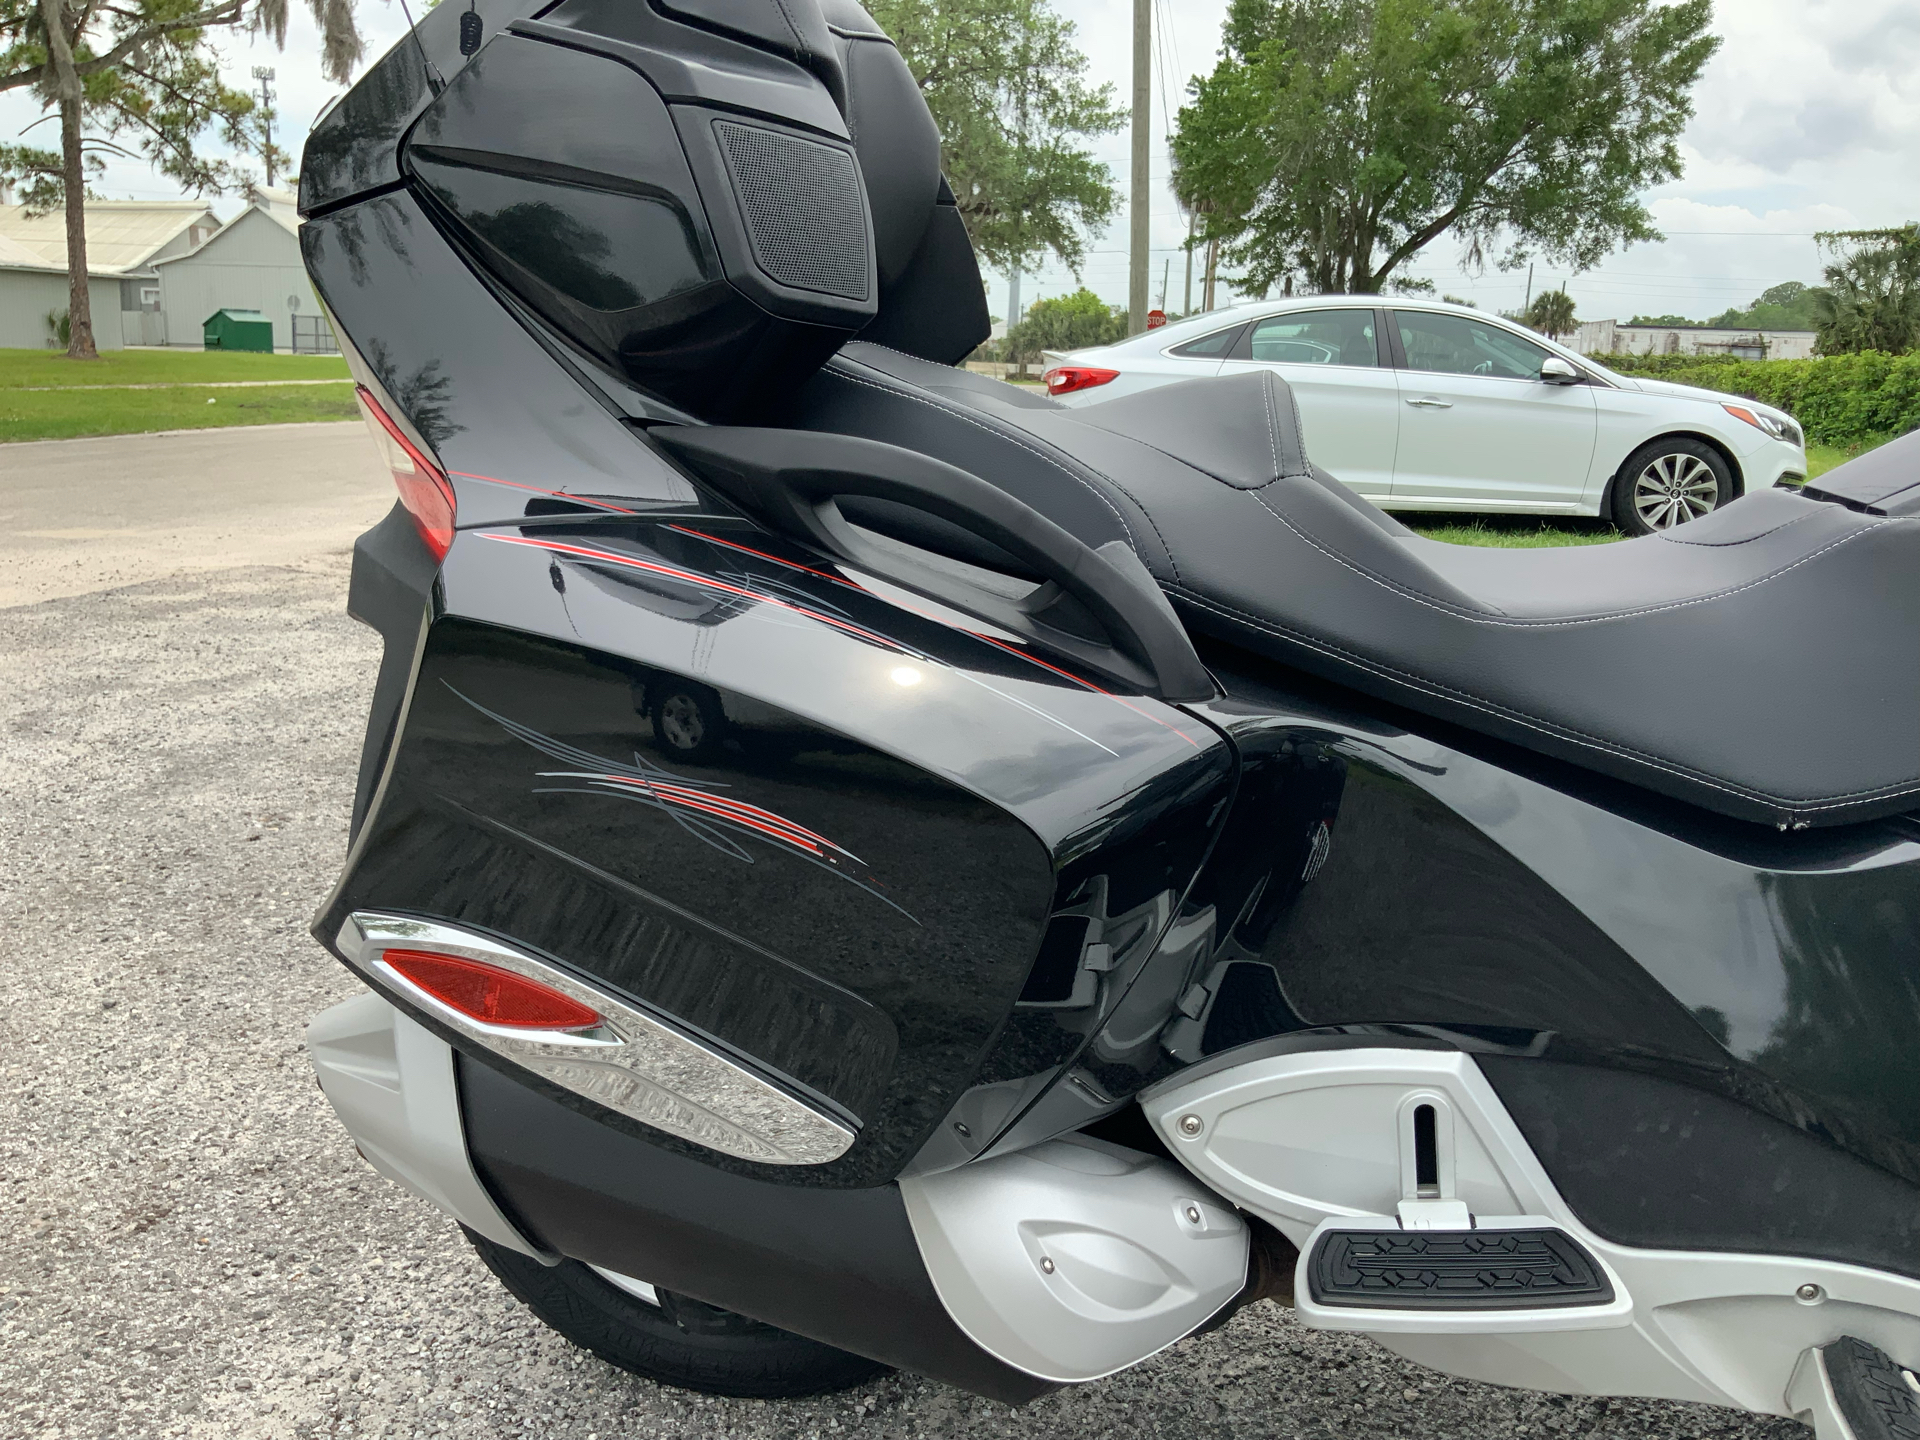 2010 Can-Am Spyder™ RT-S SM5 in Sanford, Florida - Photo 11